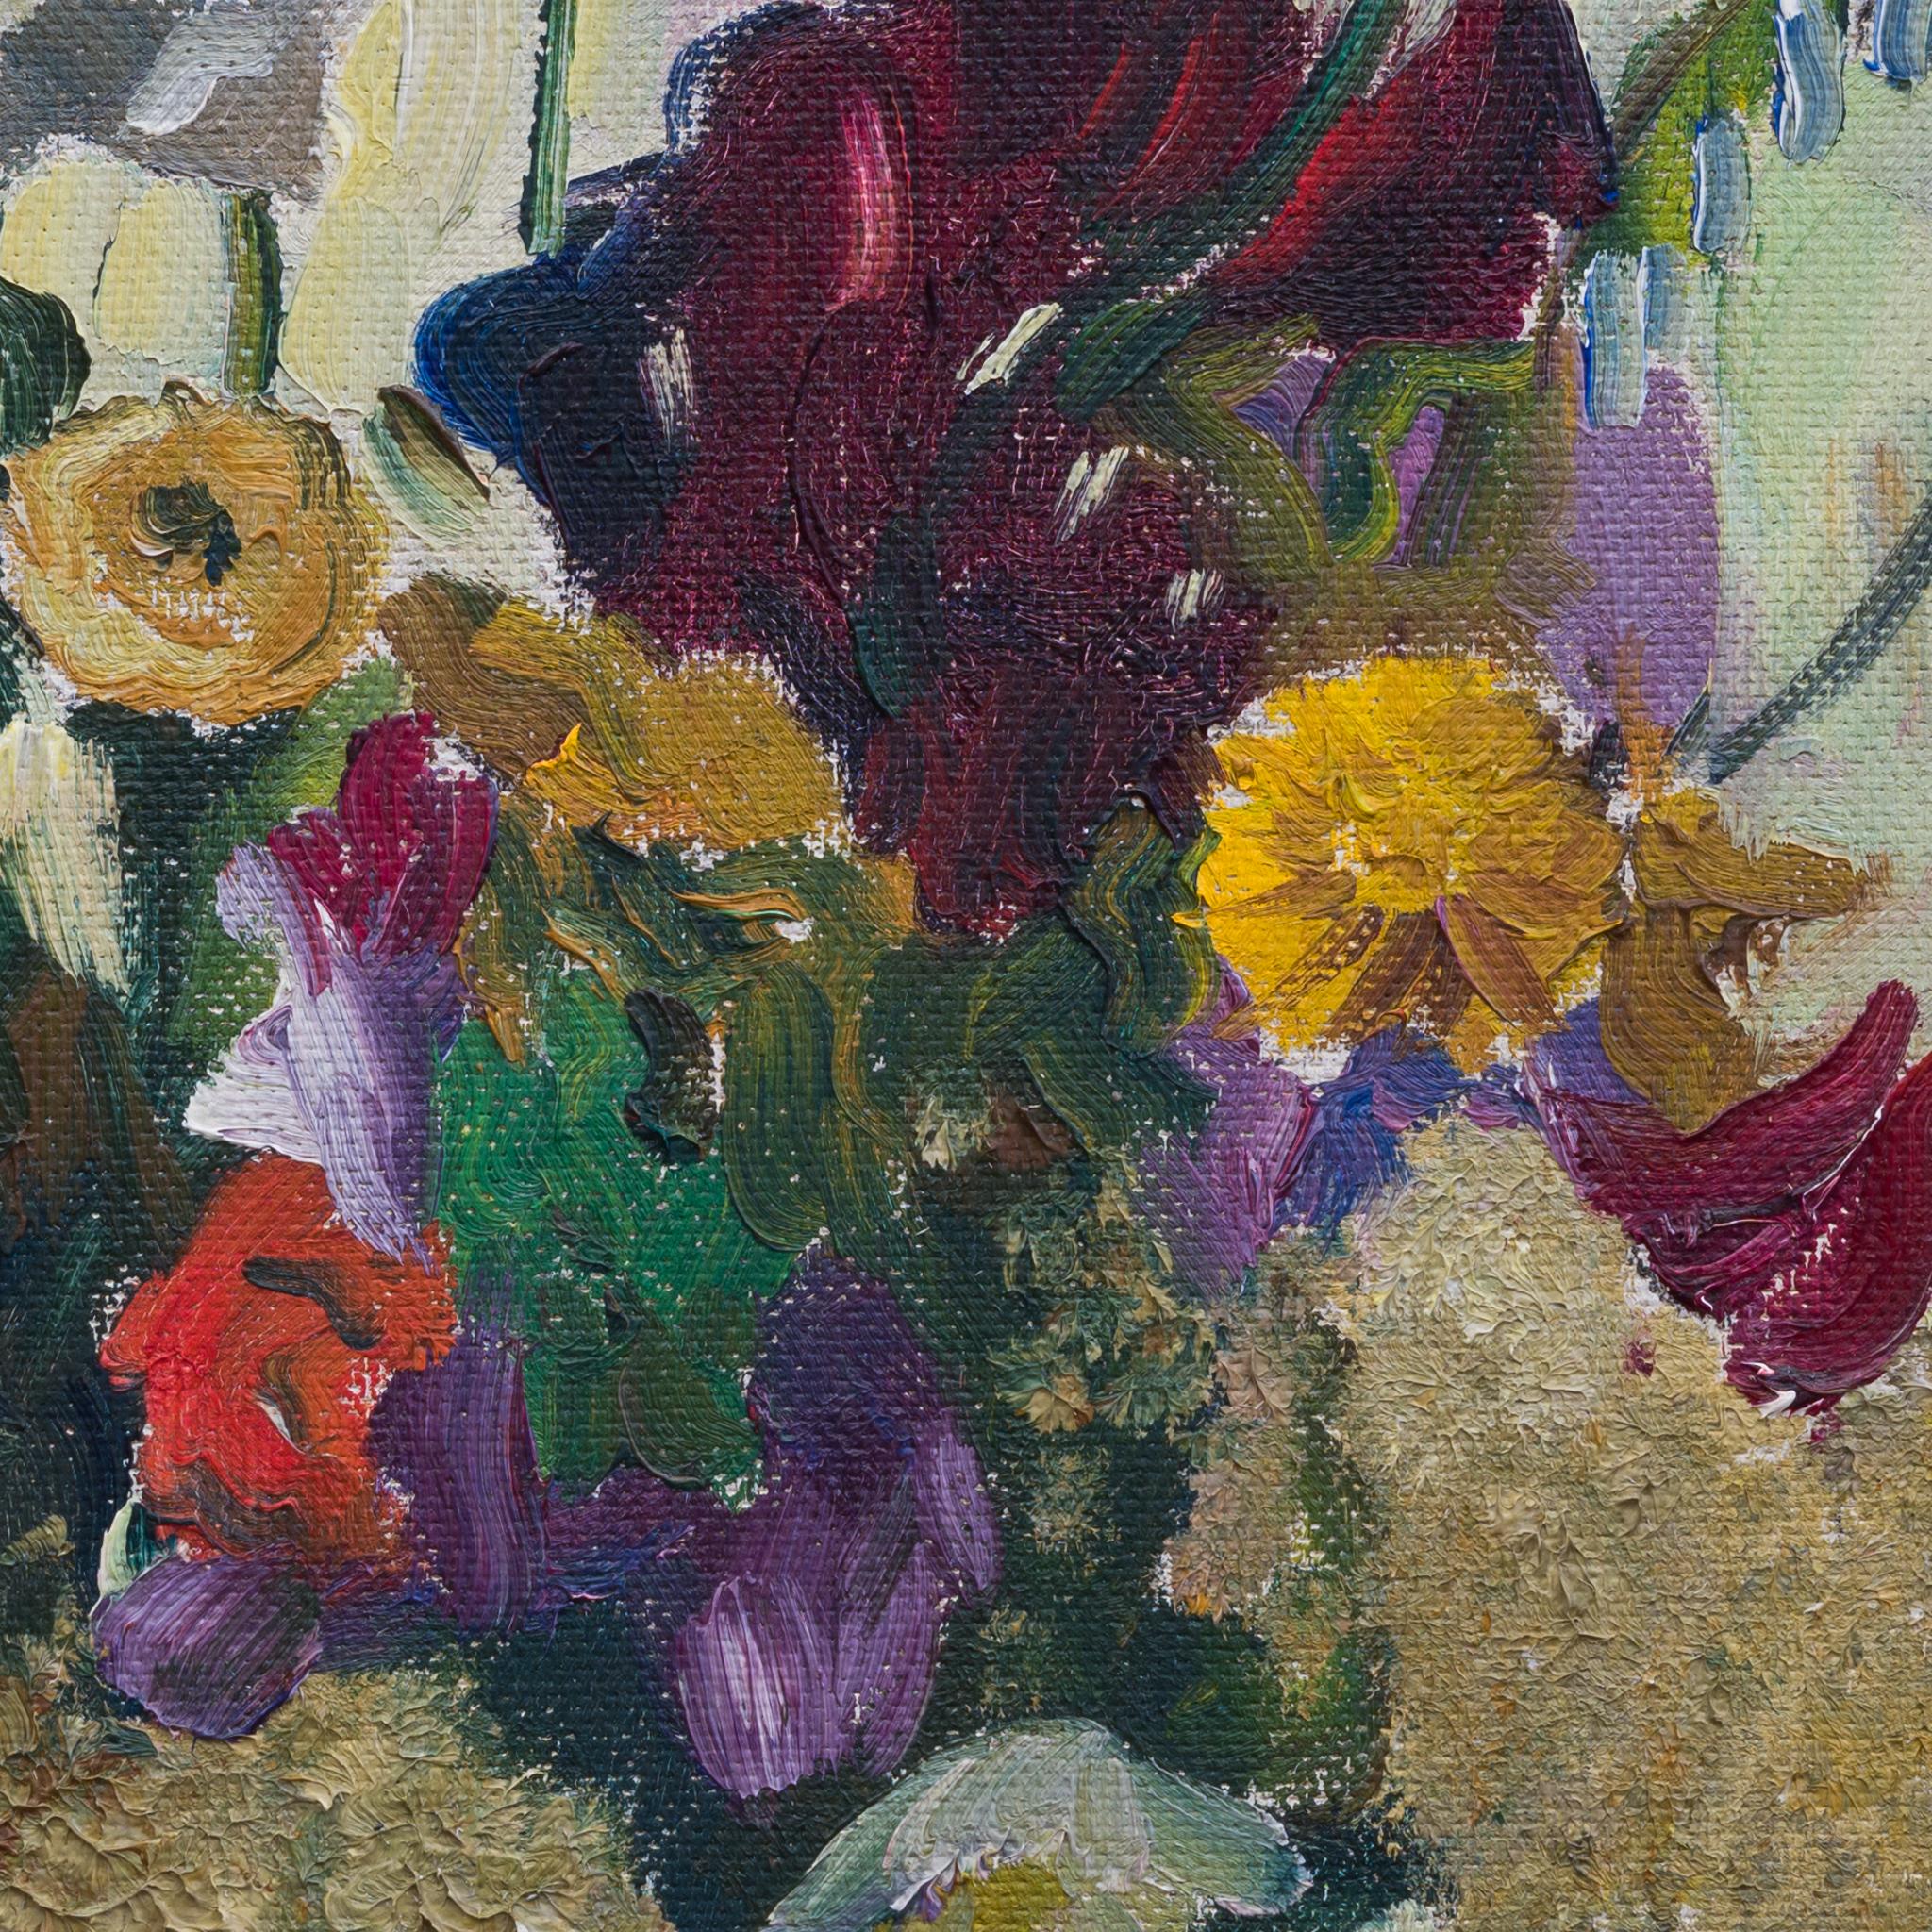 Ture Ander (1881-1959) Sweden

A Bouquet of Digitalis, Poppy, Iris, Snapdragons, Cornflower, Buttercup. 1936

oil on board
signed and dated Ture Ander 36
board dimensions 24,41 x 18,90 inches (62 x 48 cm)
frame 29,13 x 24,02 inches (74 x 61